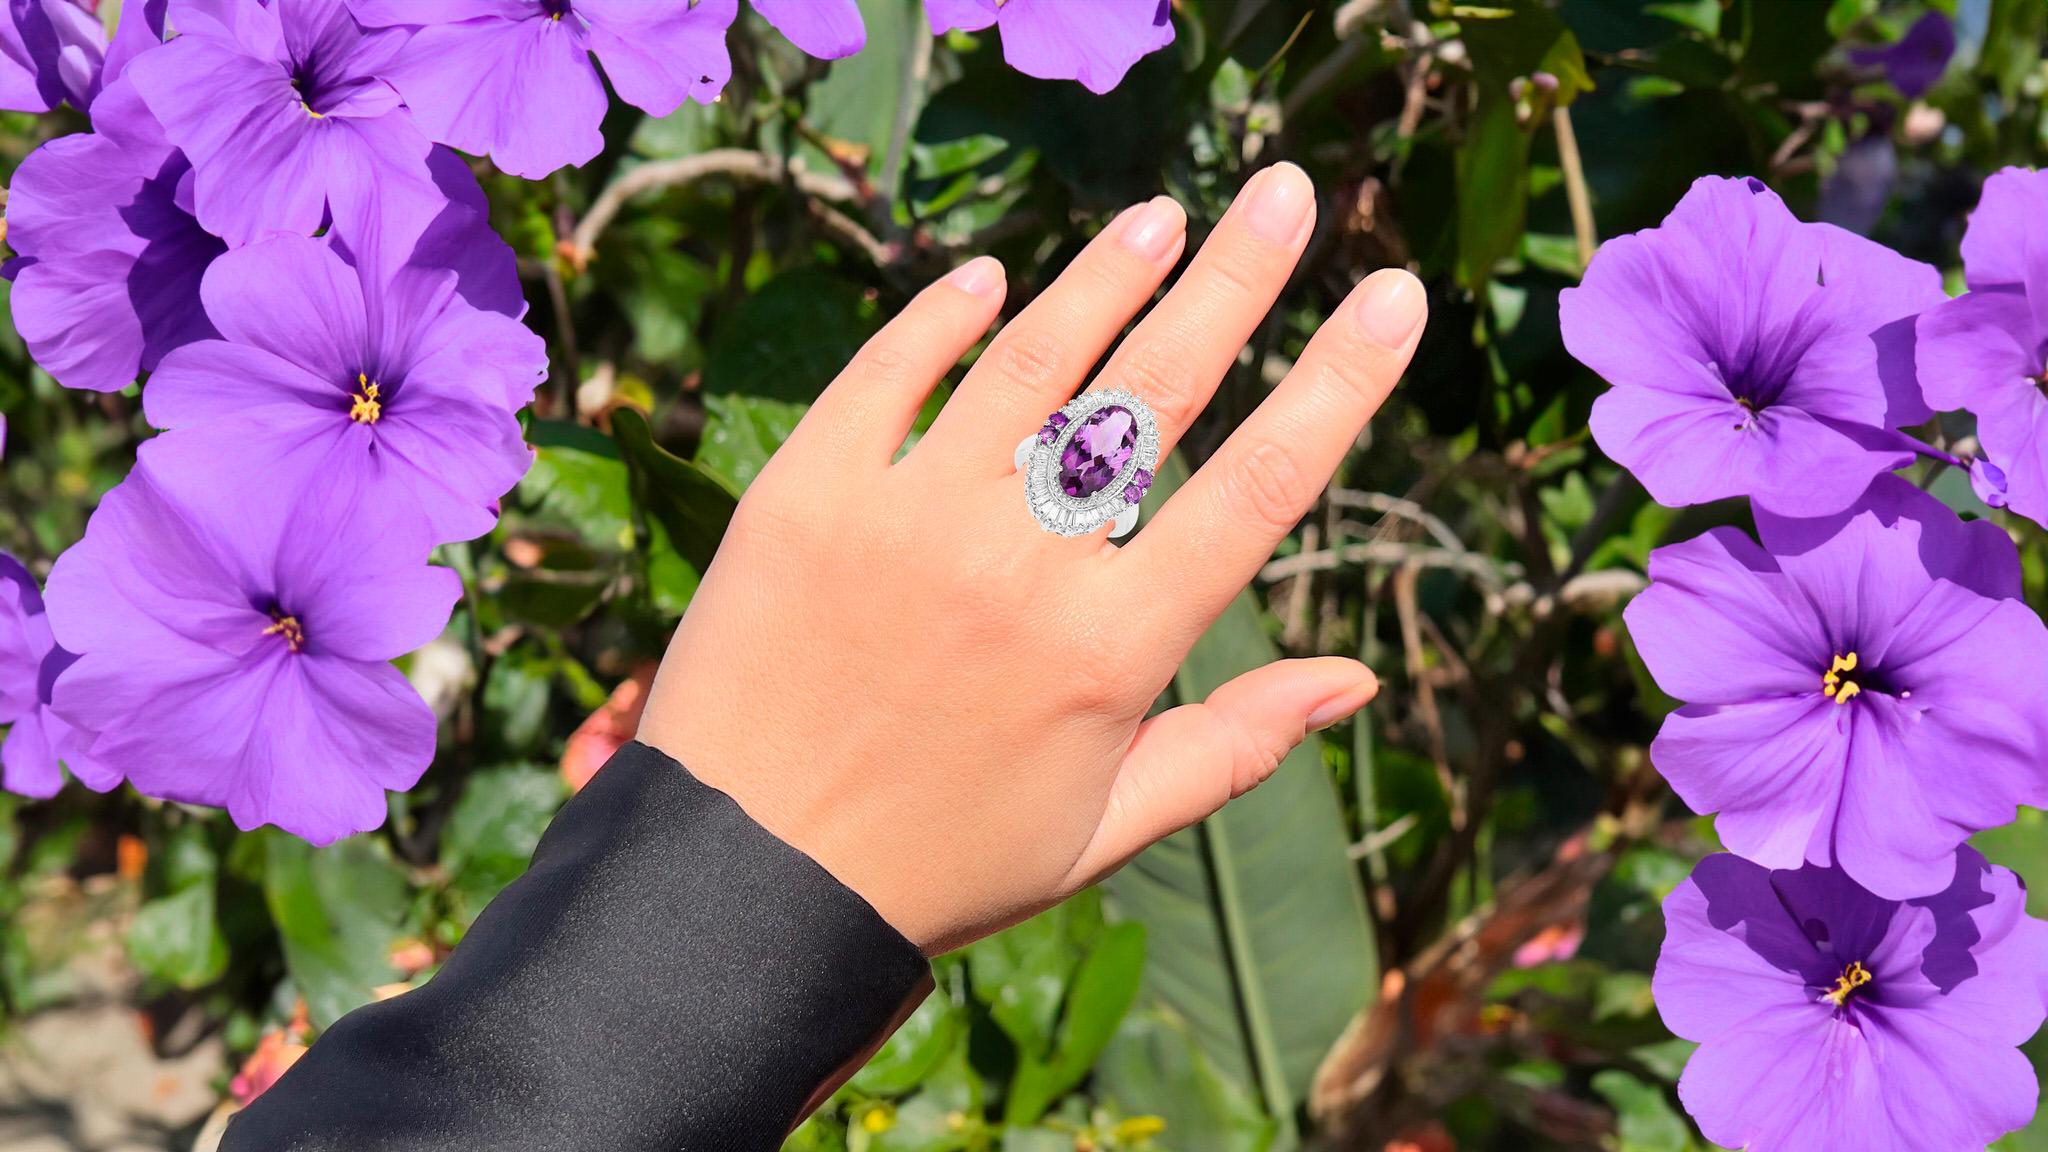 It comes with the Gemological Appraisal by GIA GG/AJP
All Gemstones are Natural
Main Amethyst = 6 Carat
Other Amethysts = 0.40 Carats
White Topazes = 1.55 Carats
Metal: Rhodium Plated Sterling Silver
Ring Size: 6* US
*It can be resized complimentary